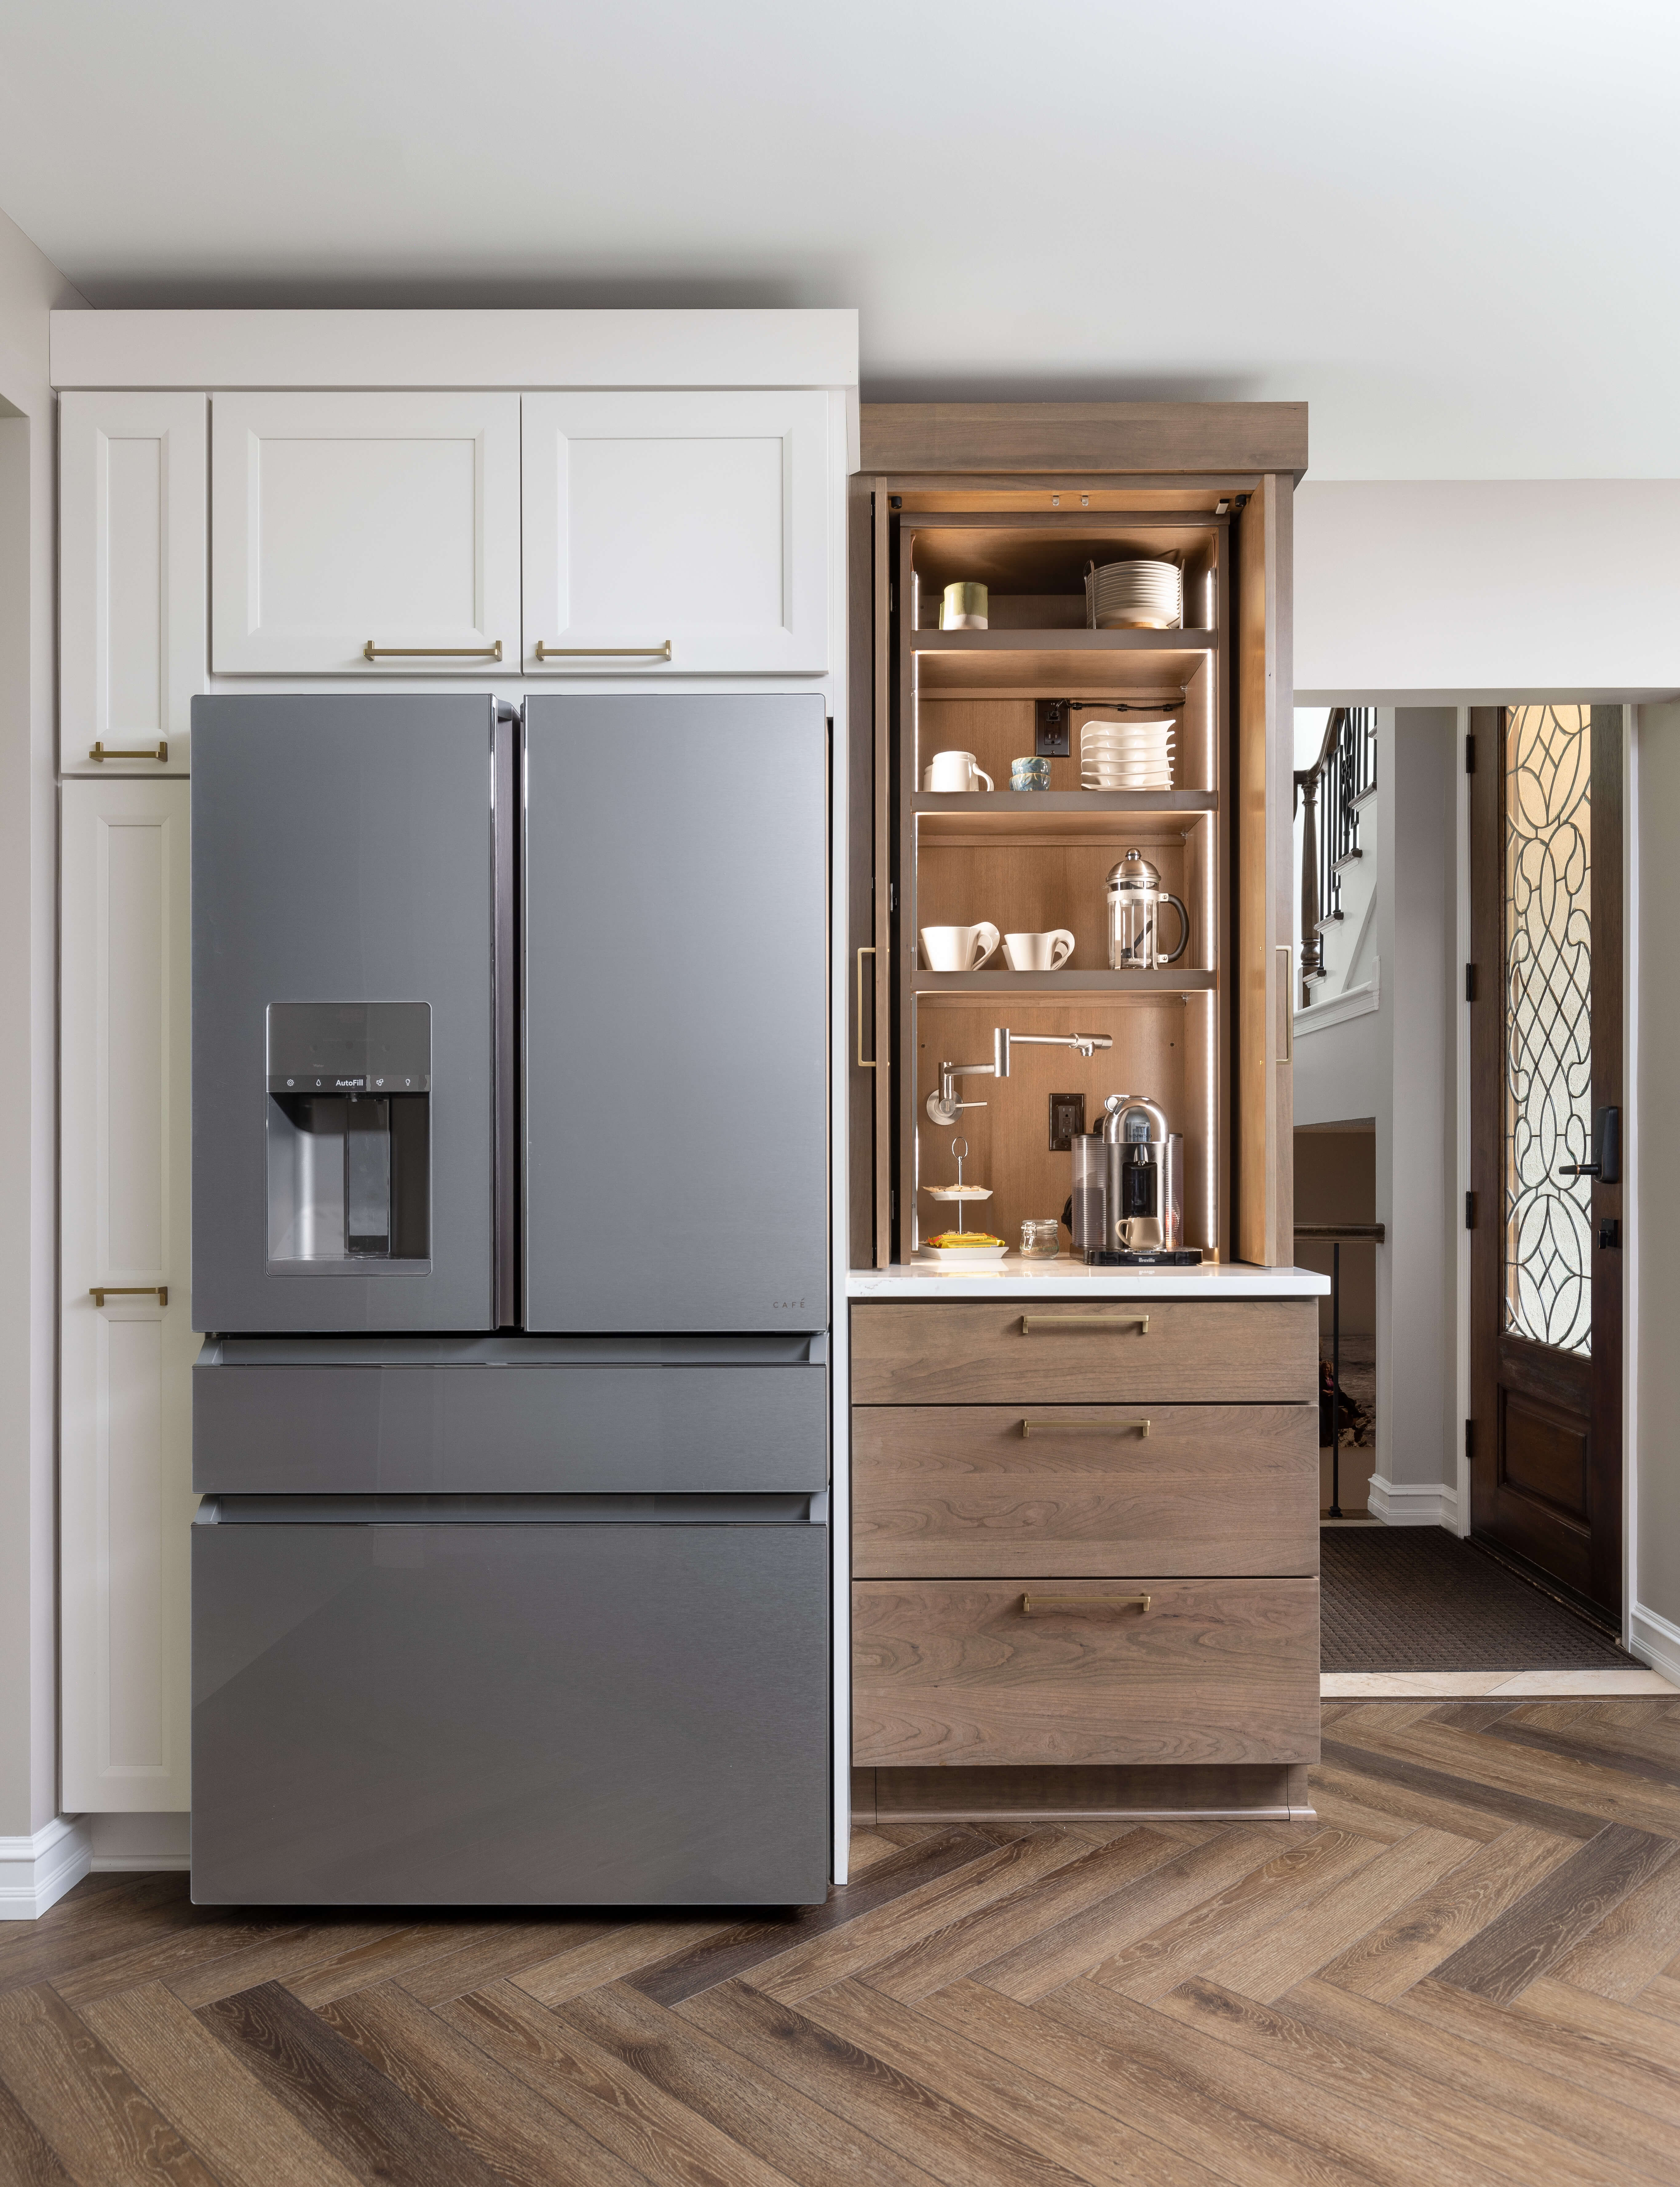 A working pantry and larder cabinet with a pot-filler for the coffee maker to create an easy-to-access coffee station that can be hidden away.